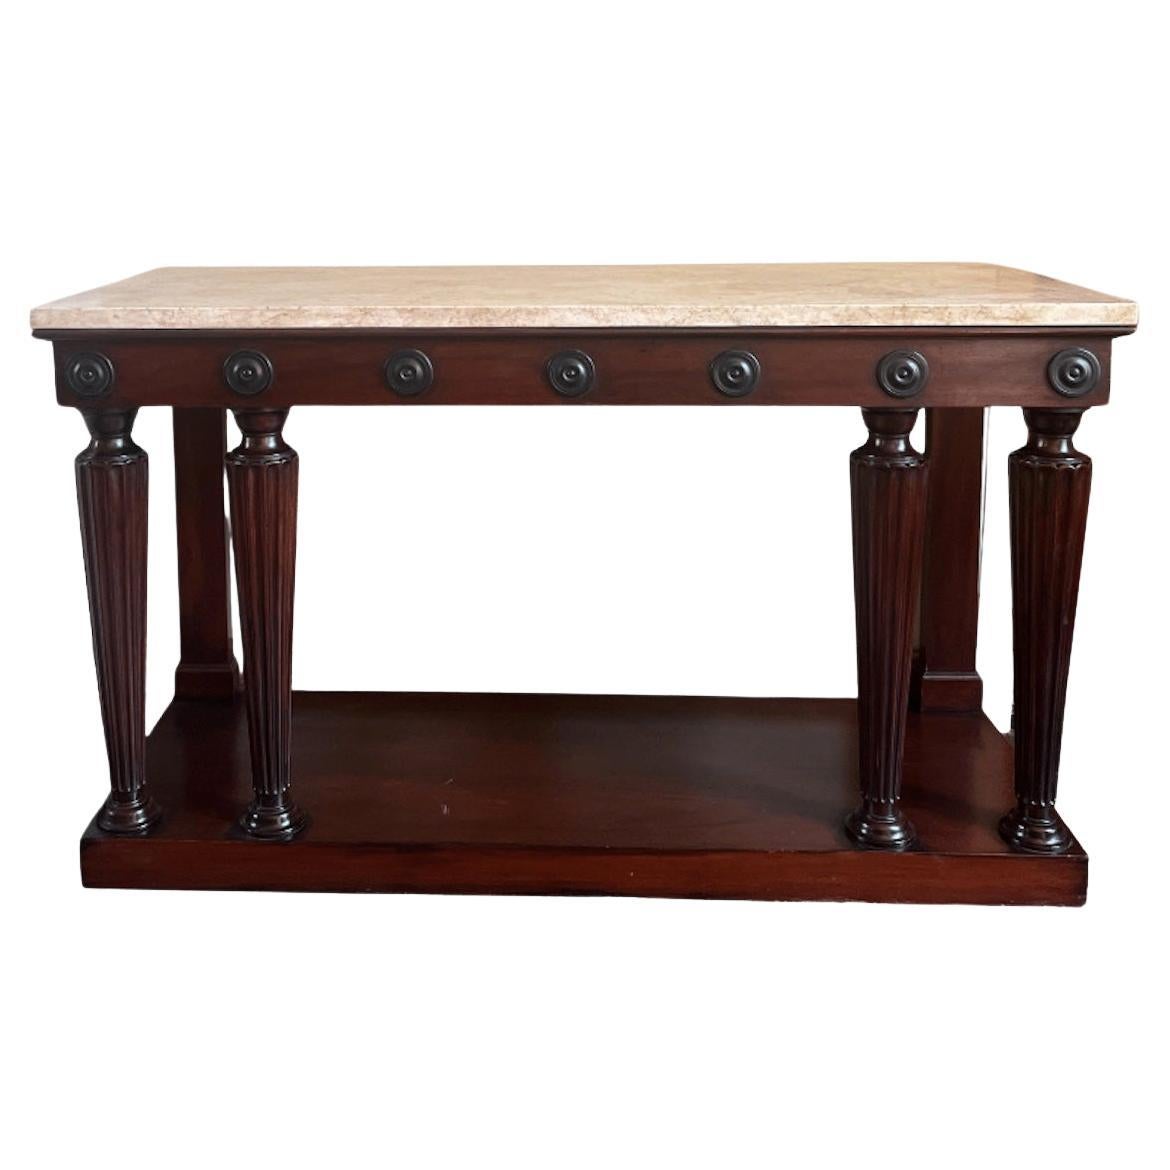 The George Smith Console For Sale